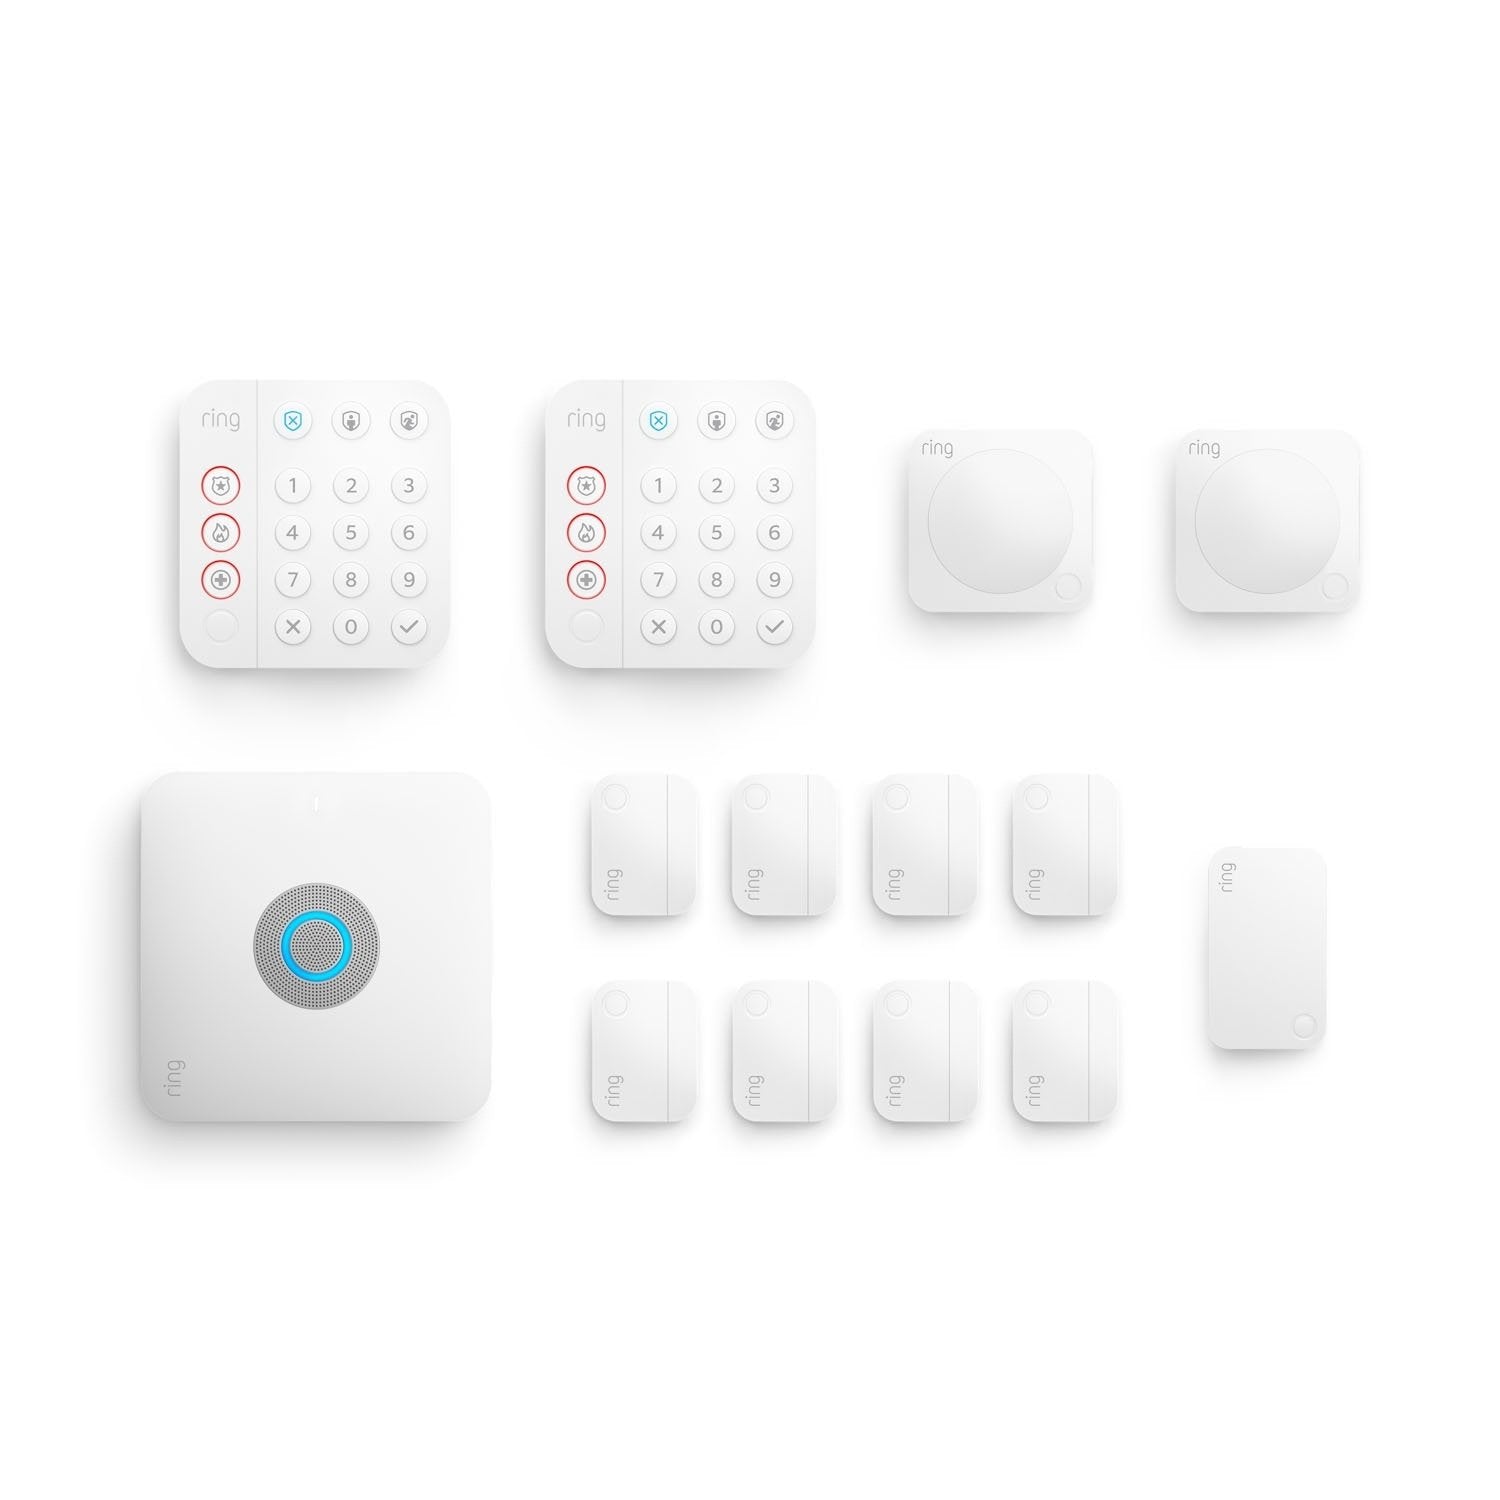 Alarm Pro Security Kit, 14-Piece (with built-in eero Wi-Fi 6 router) - White:Alarm Pro Security Kit, 14-Piece (with built-in eero Wi-Fi 6 router)